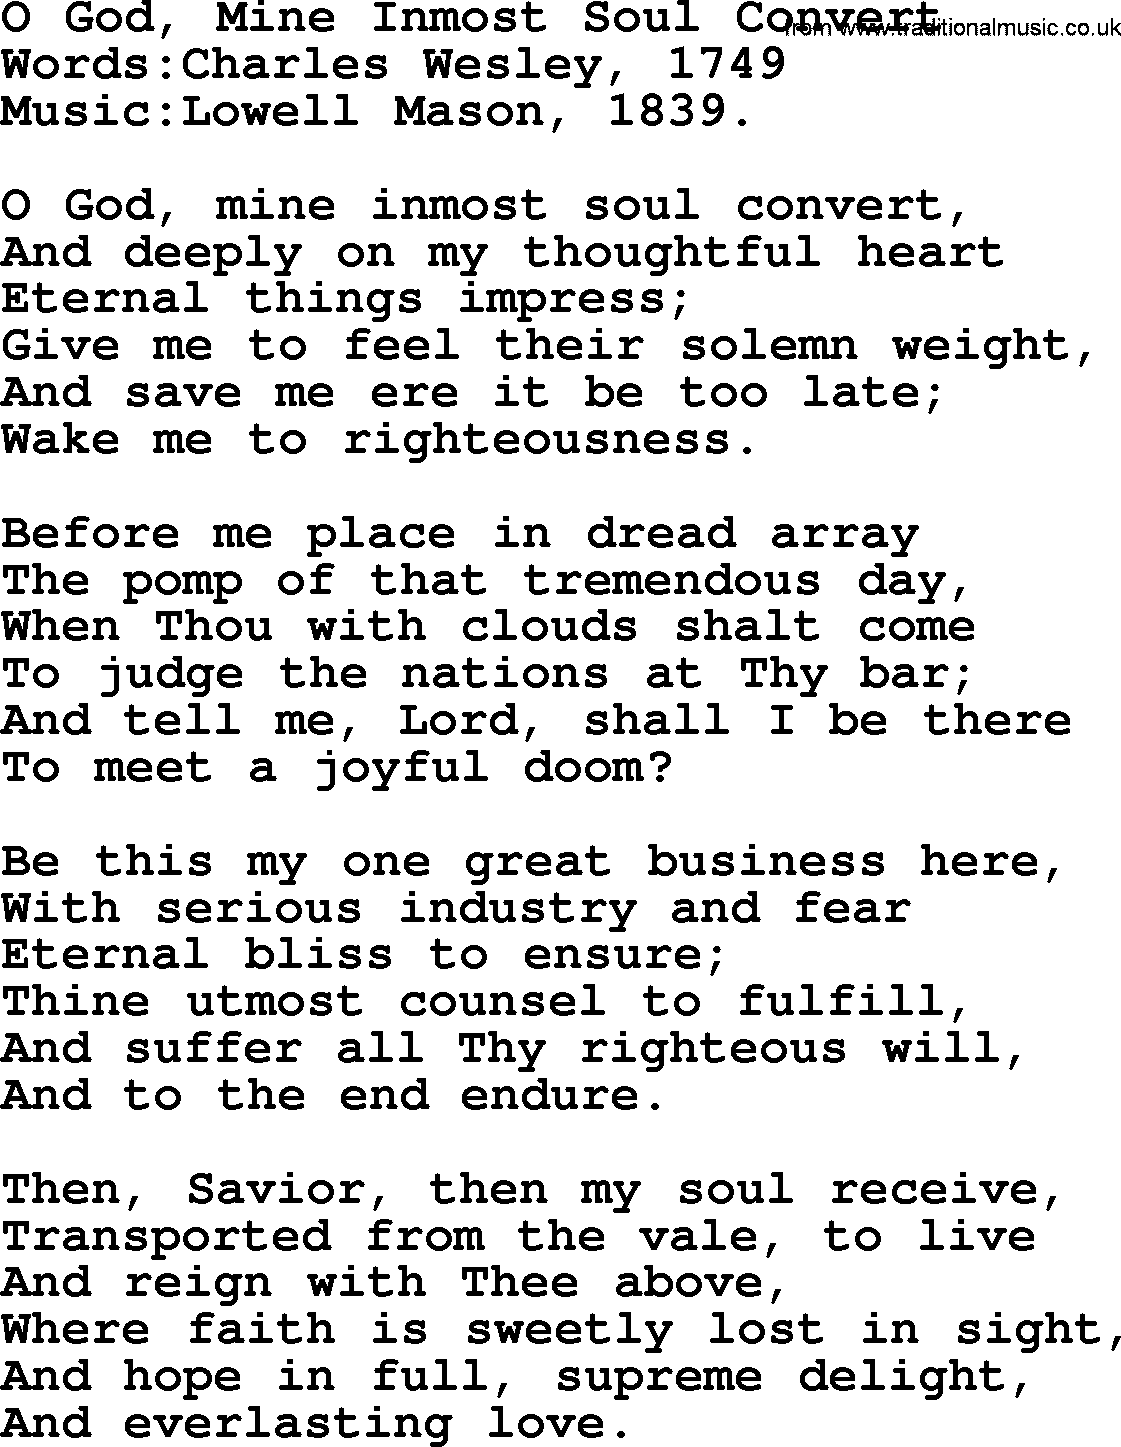 Christian hymns and songs about Jesus' Return(The Second Coming): O God, Mine Inmost Soul Convert, lyrics with PDF